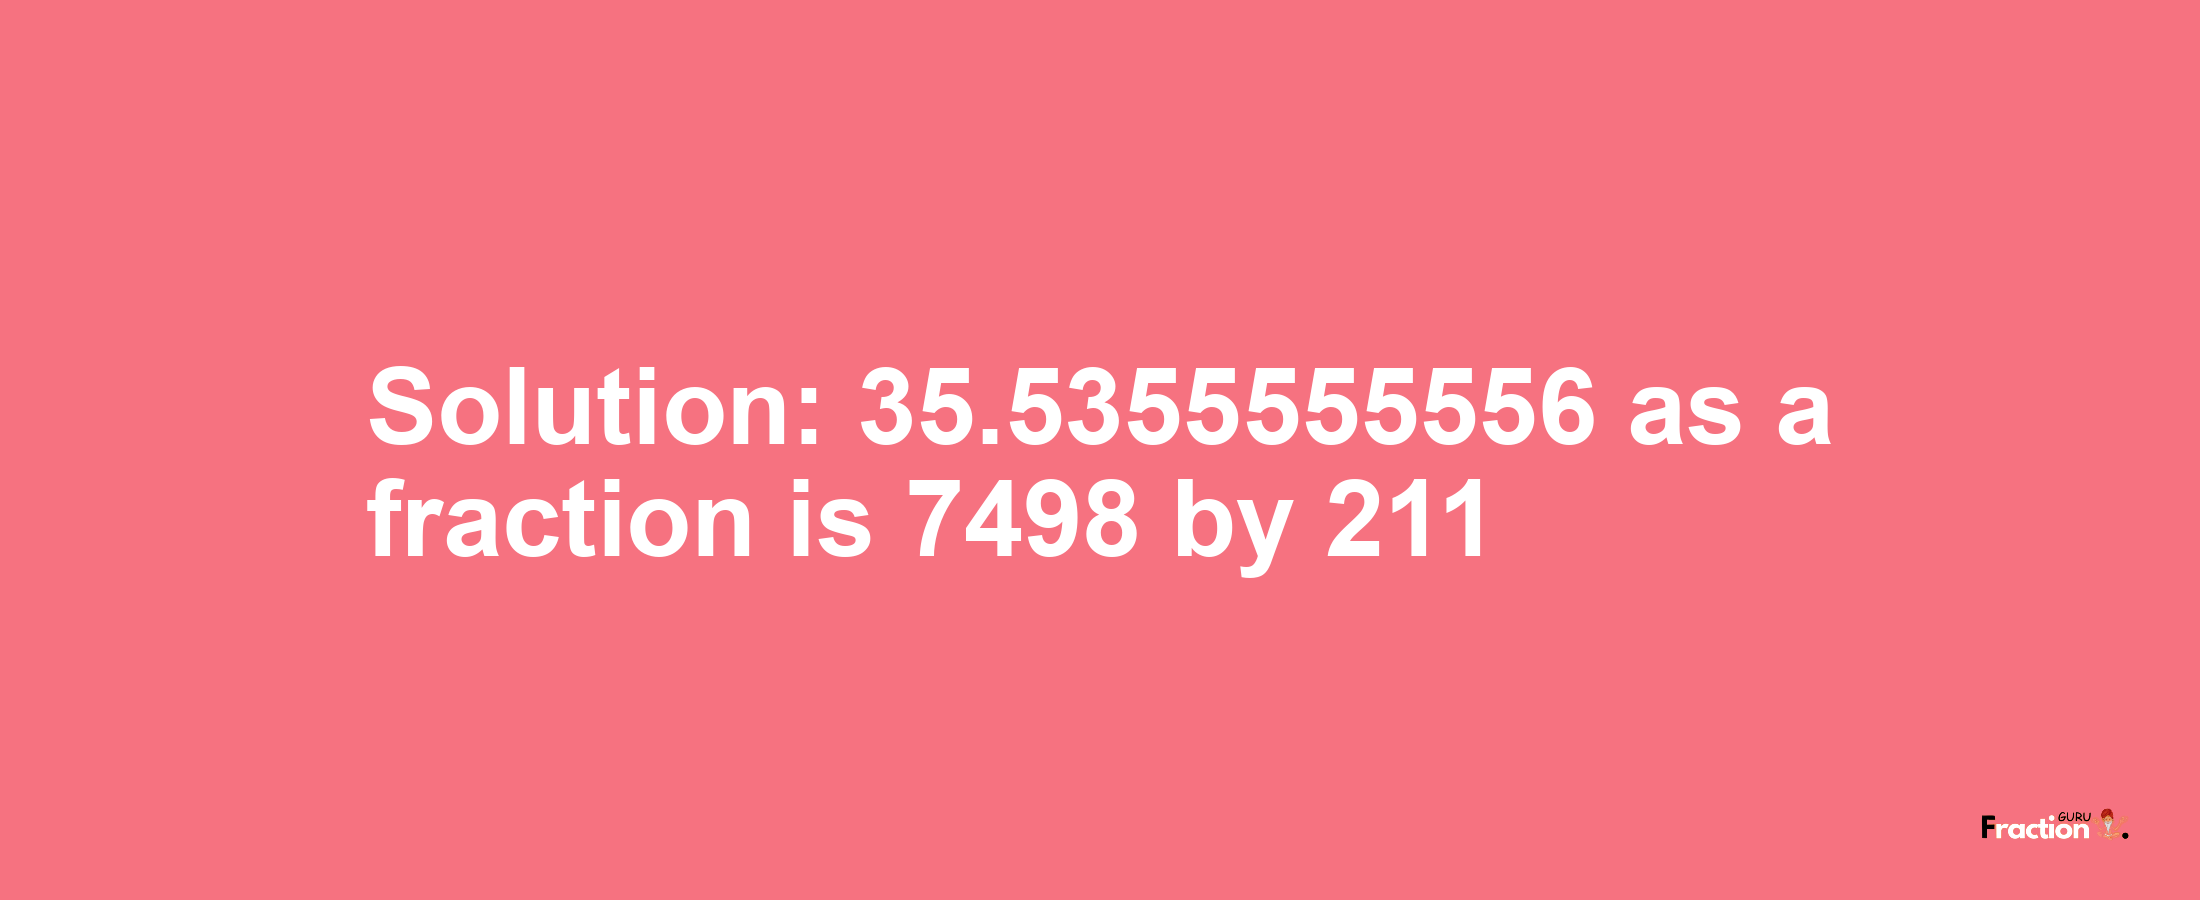 Solution:35.5355555556 as a fraction is 7498/211